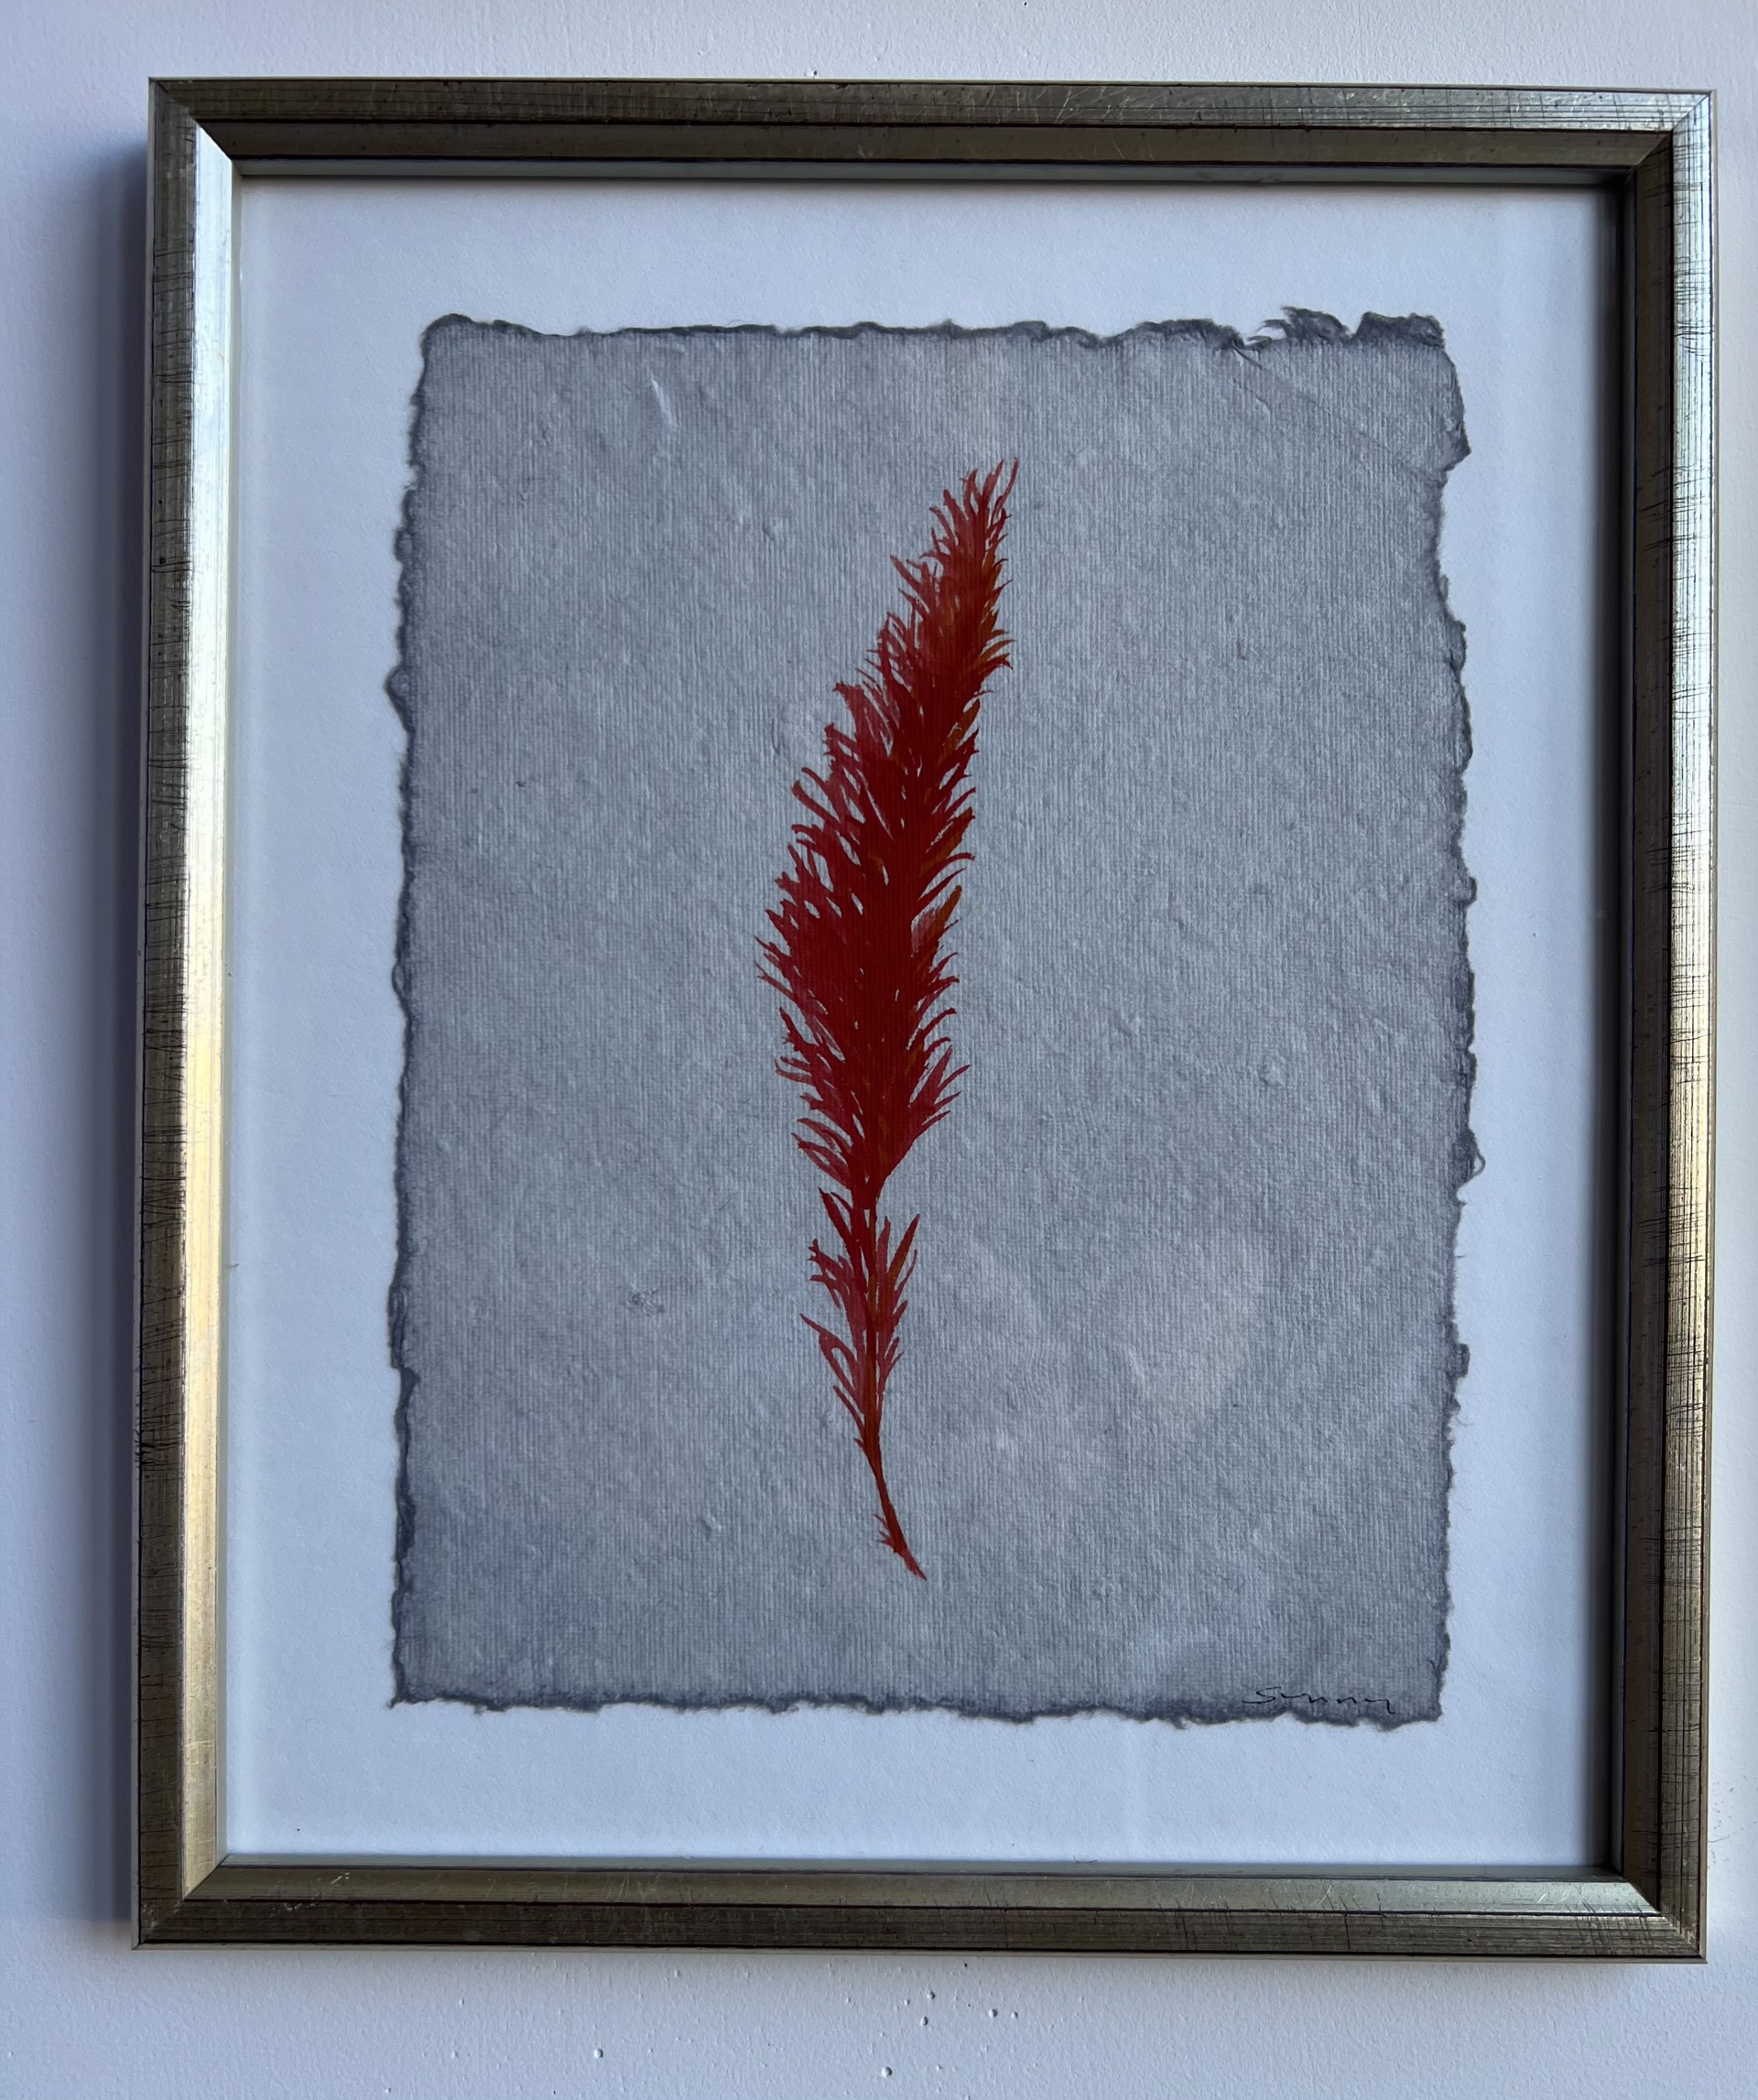 Feather by Sunny Goode